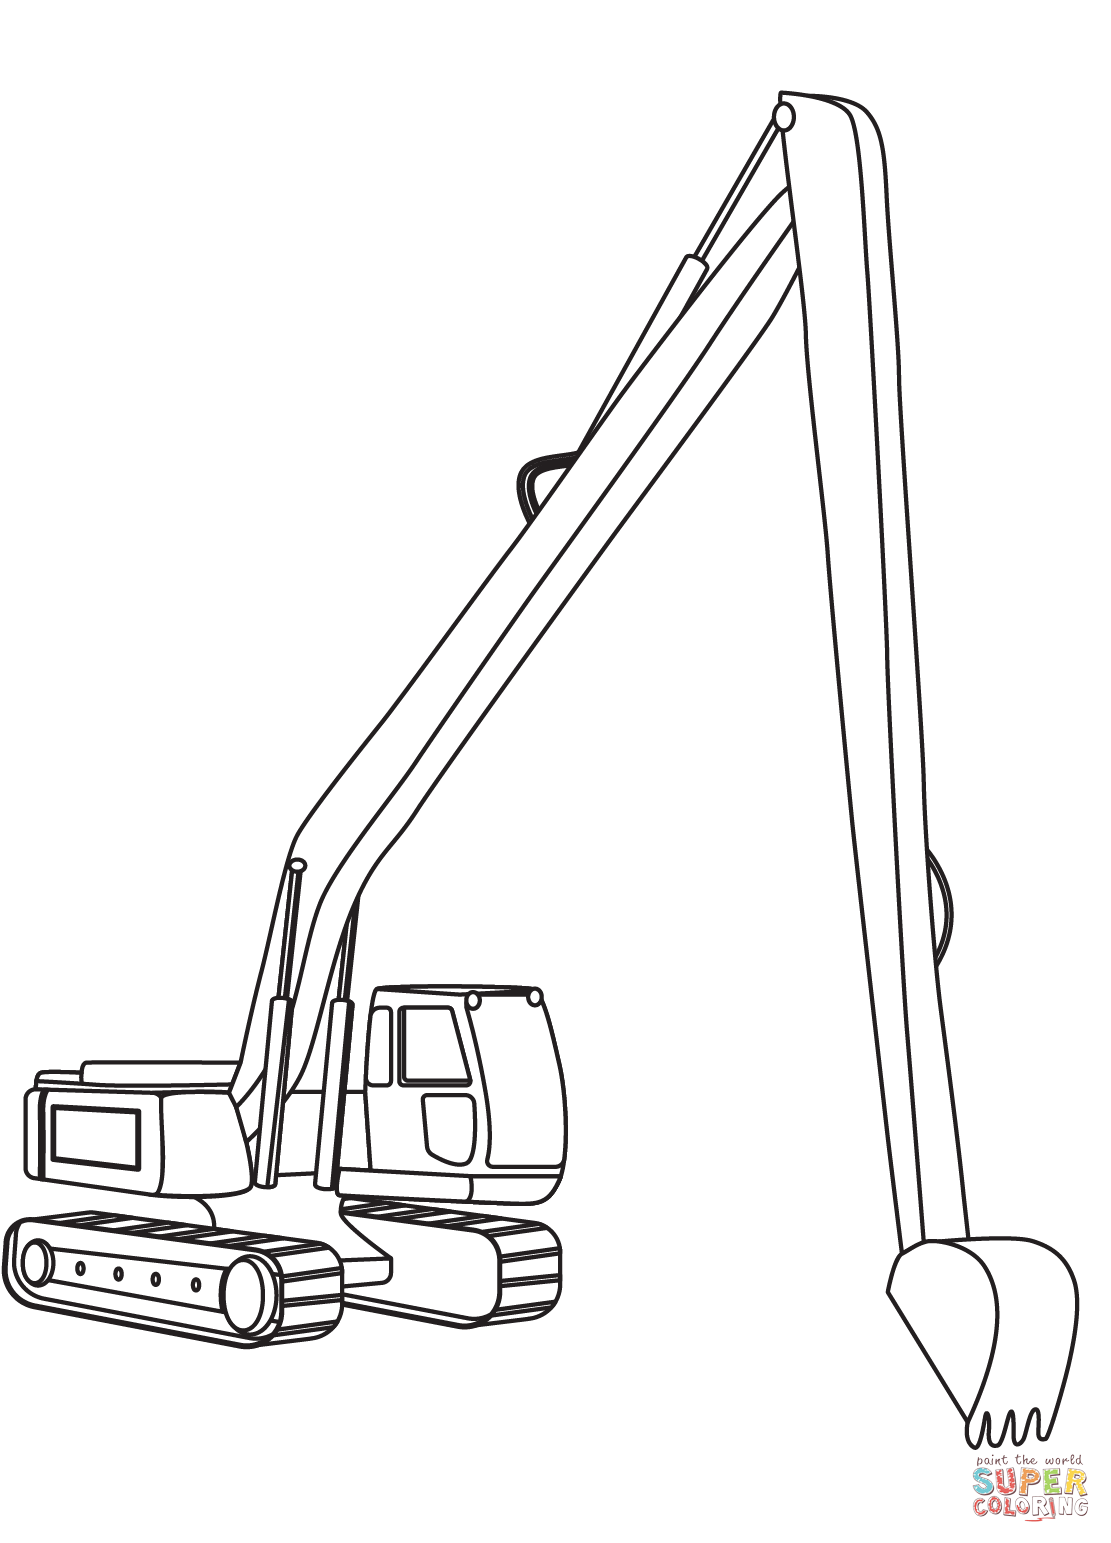 Long Reach Excavator coloring page | Free Printable Coloring Pages